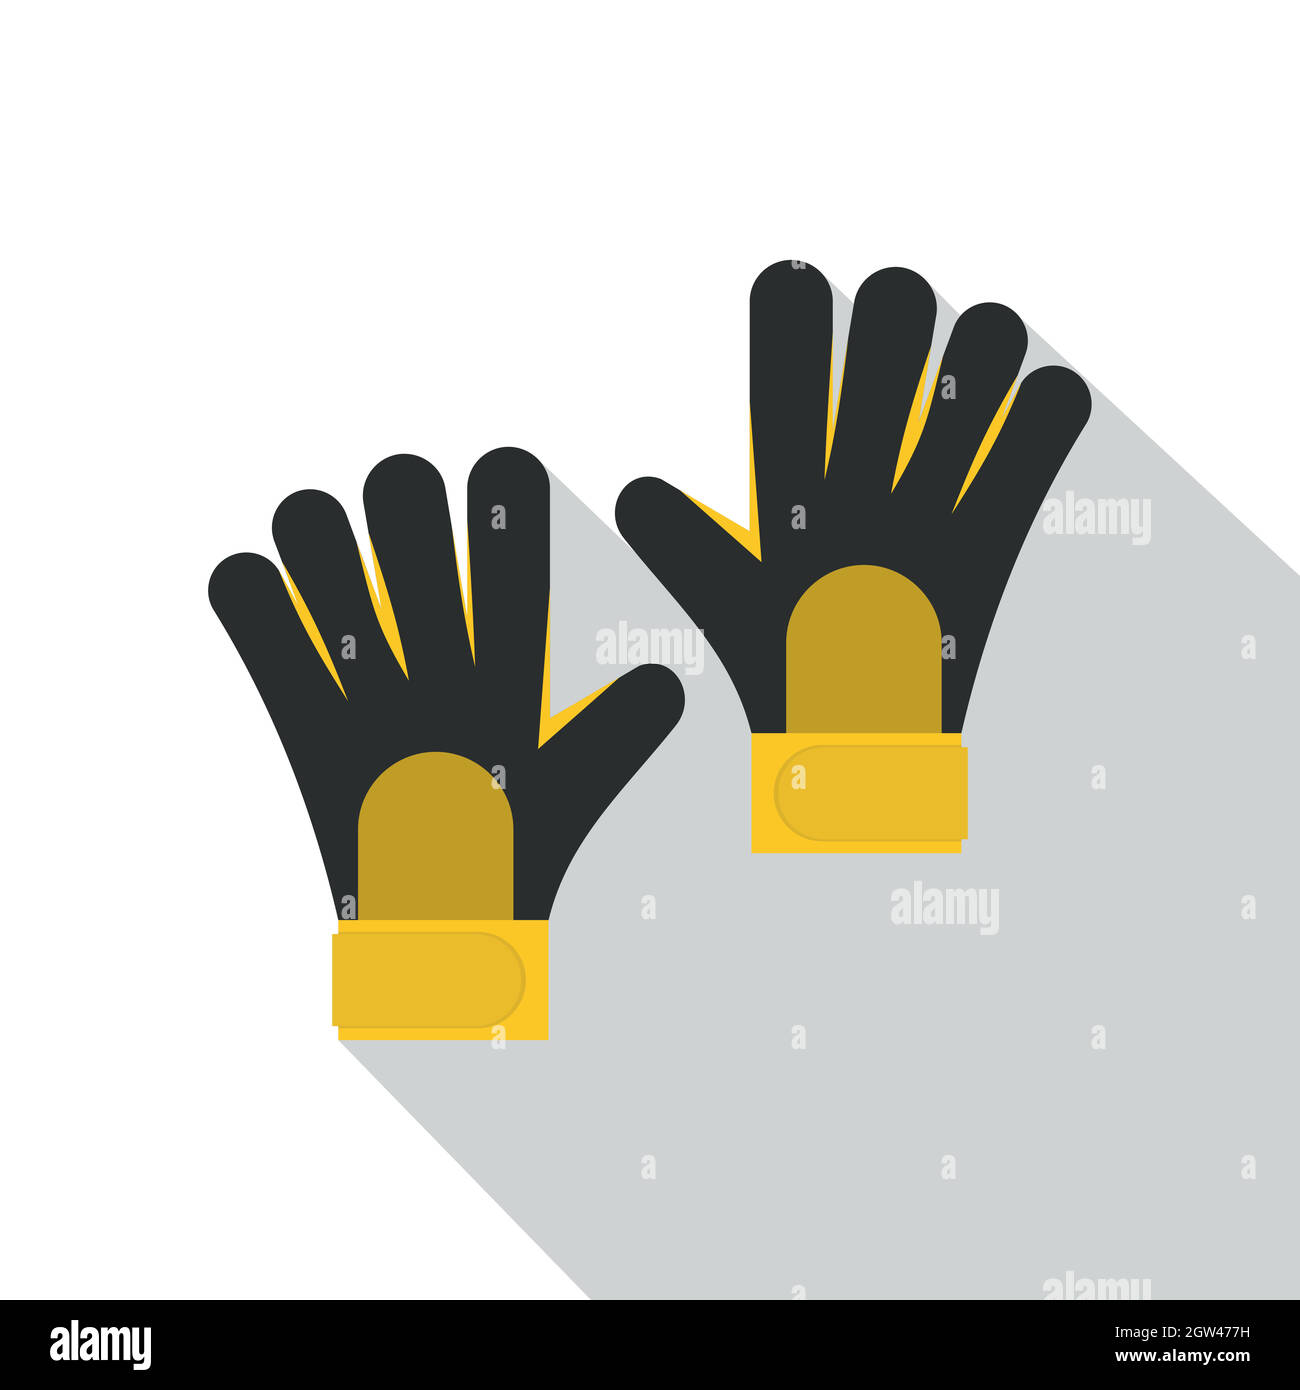 Soccer goalkeepers gloves icon, flat style Stock Vector